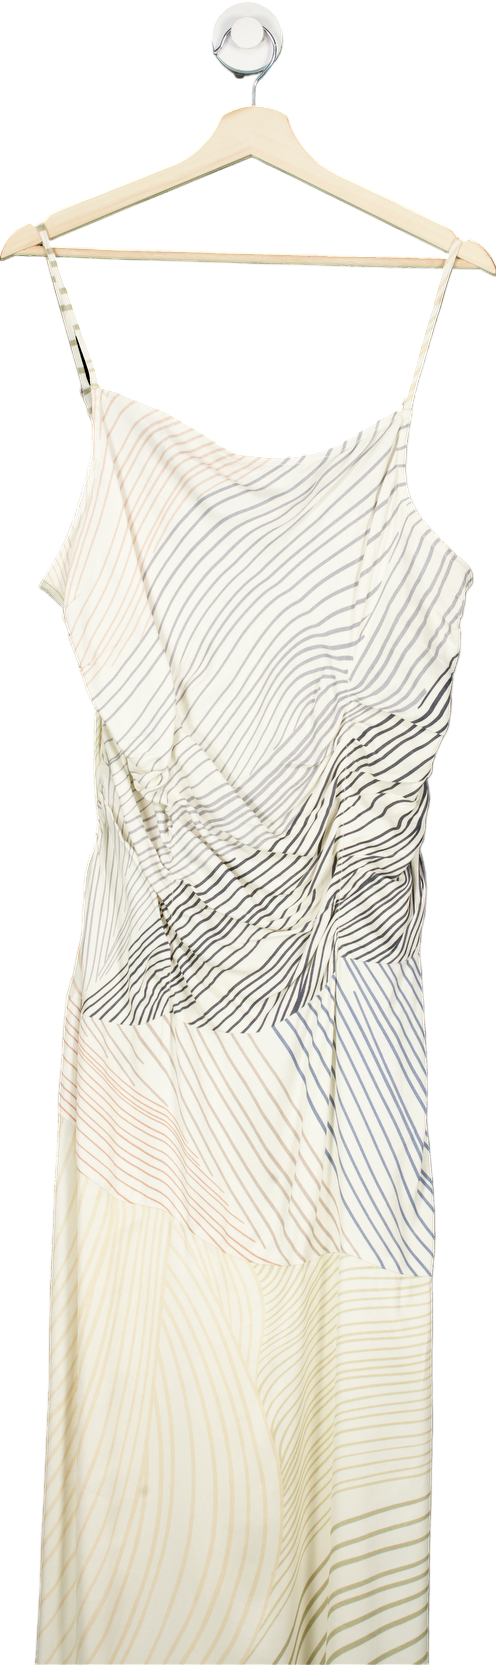 {Conditions Apply} White/Black Abstract Striped Maxi Dress UK 8